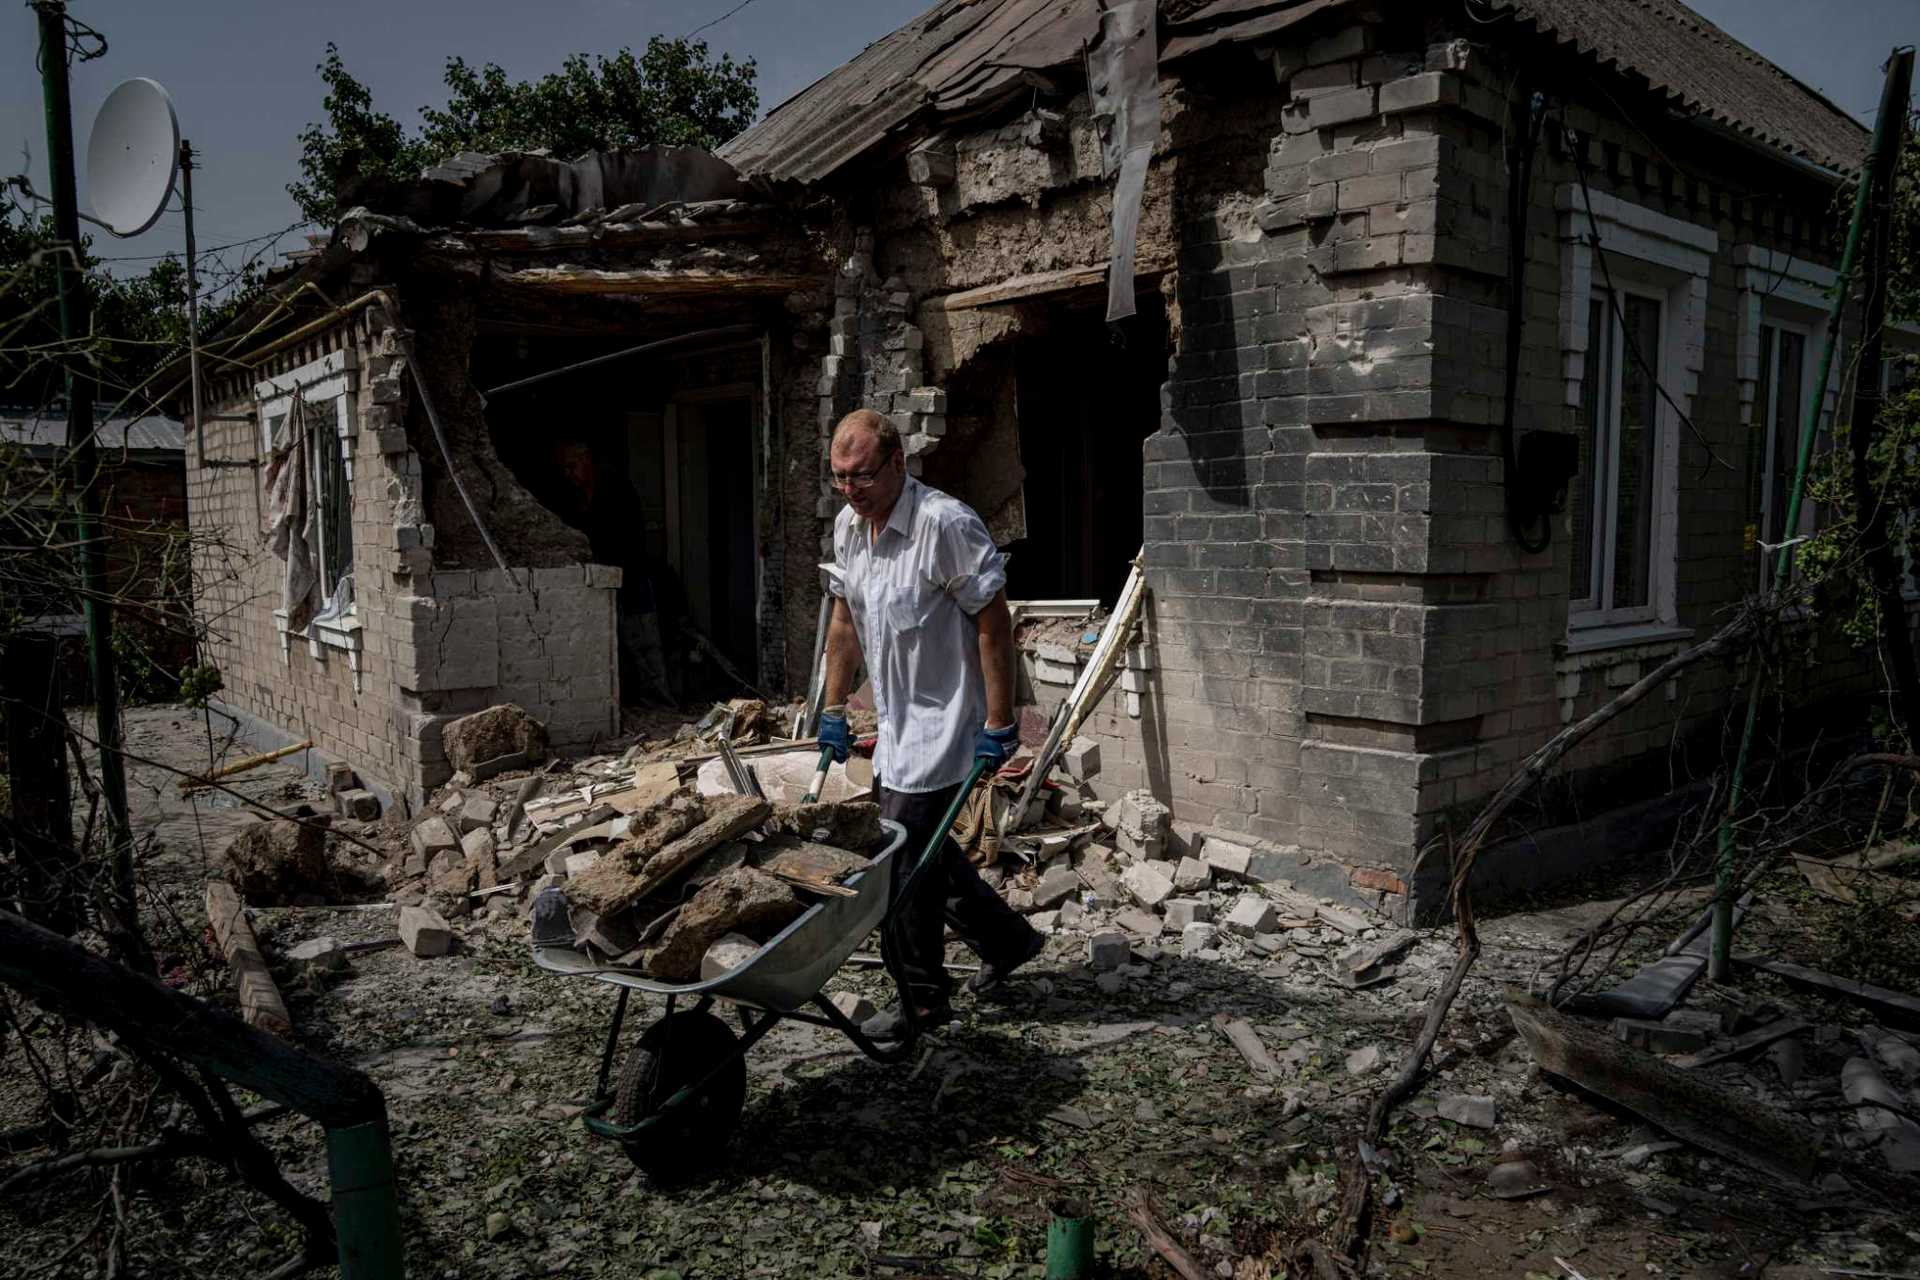 Dmyto Shengur cleans rubble in front of the house which was damaged after Russian bombardment of residential area in Nikopol